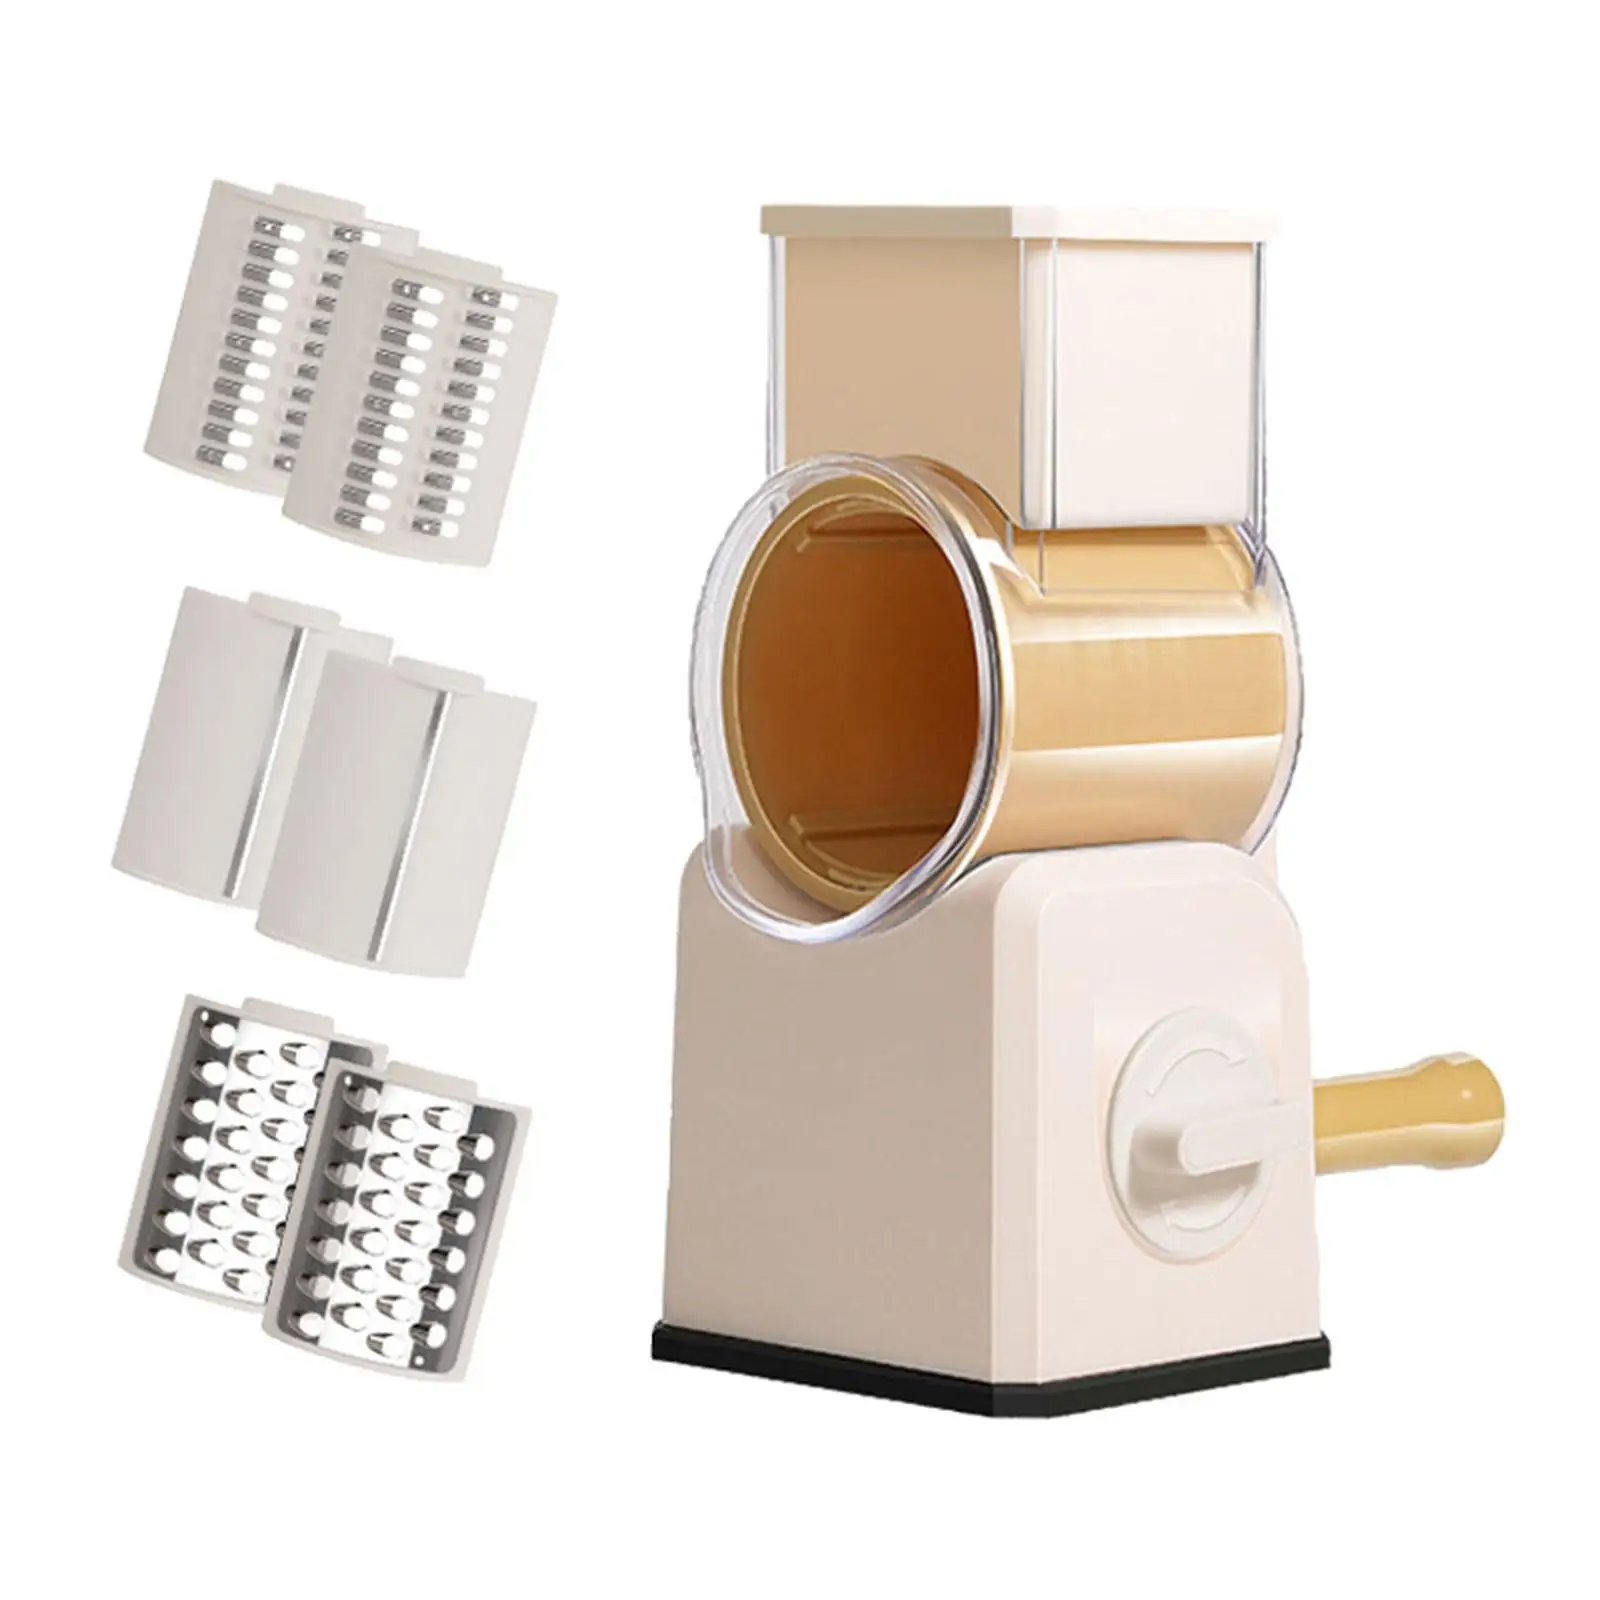 Manual Manual Rotary Cheese Grater Fruit Graters Vegetable Chopper Kitchen Tools W/ Handle for Carrots Cucumbers Onion Cheese